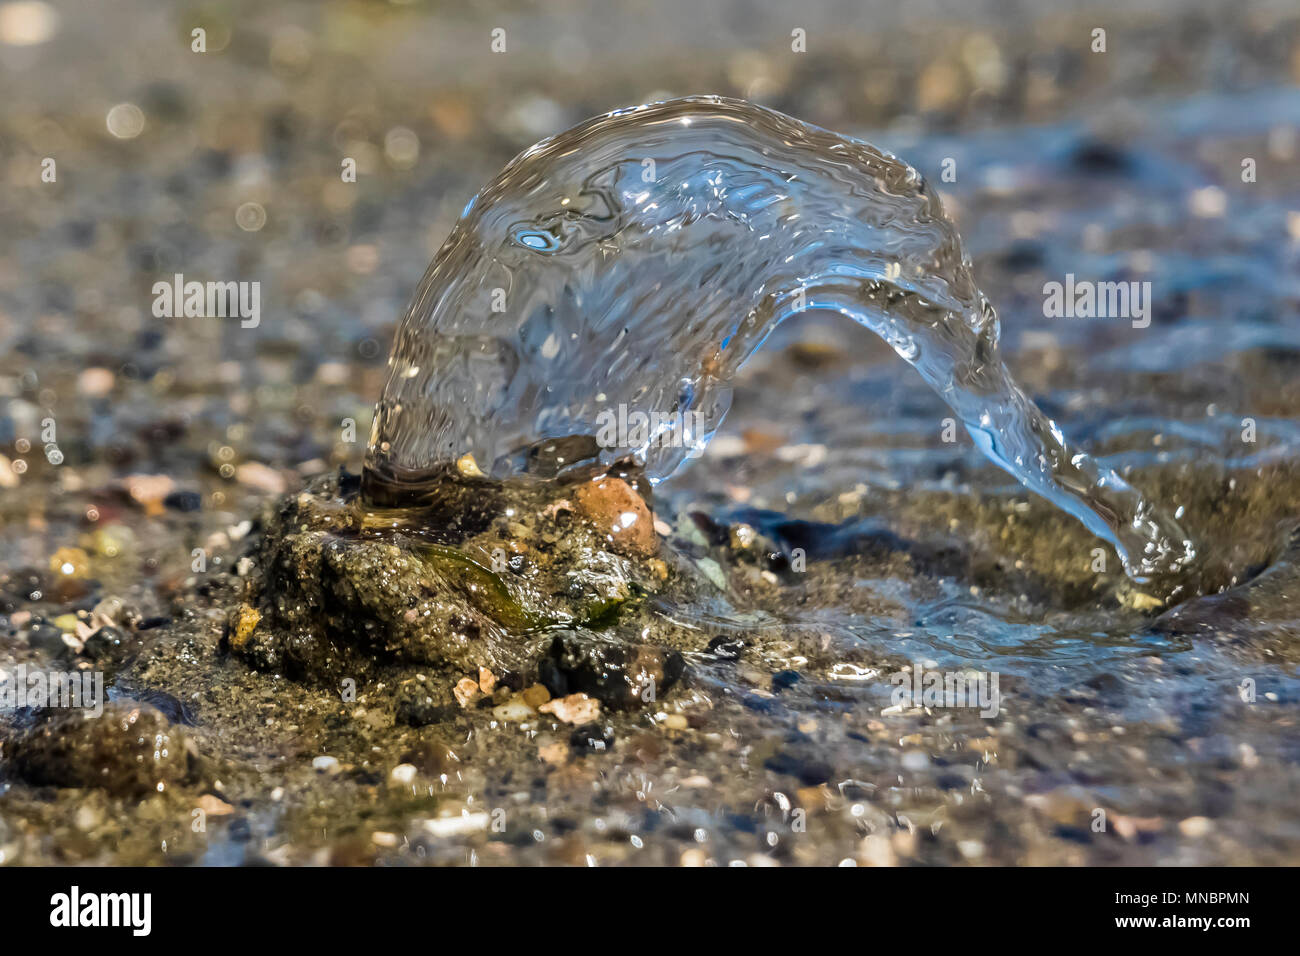 Pacific Geoduck clam, Panopea abrupta, squirting out wastewater in the muddy sand along the shore of Puget Sound at Arcadia Point, Mason County, Washi Stock Photo